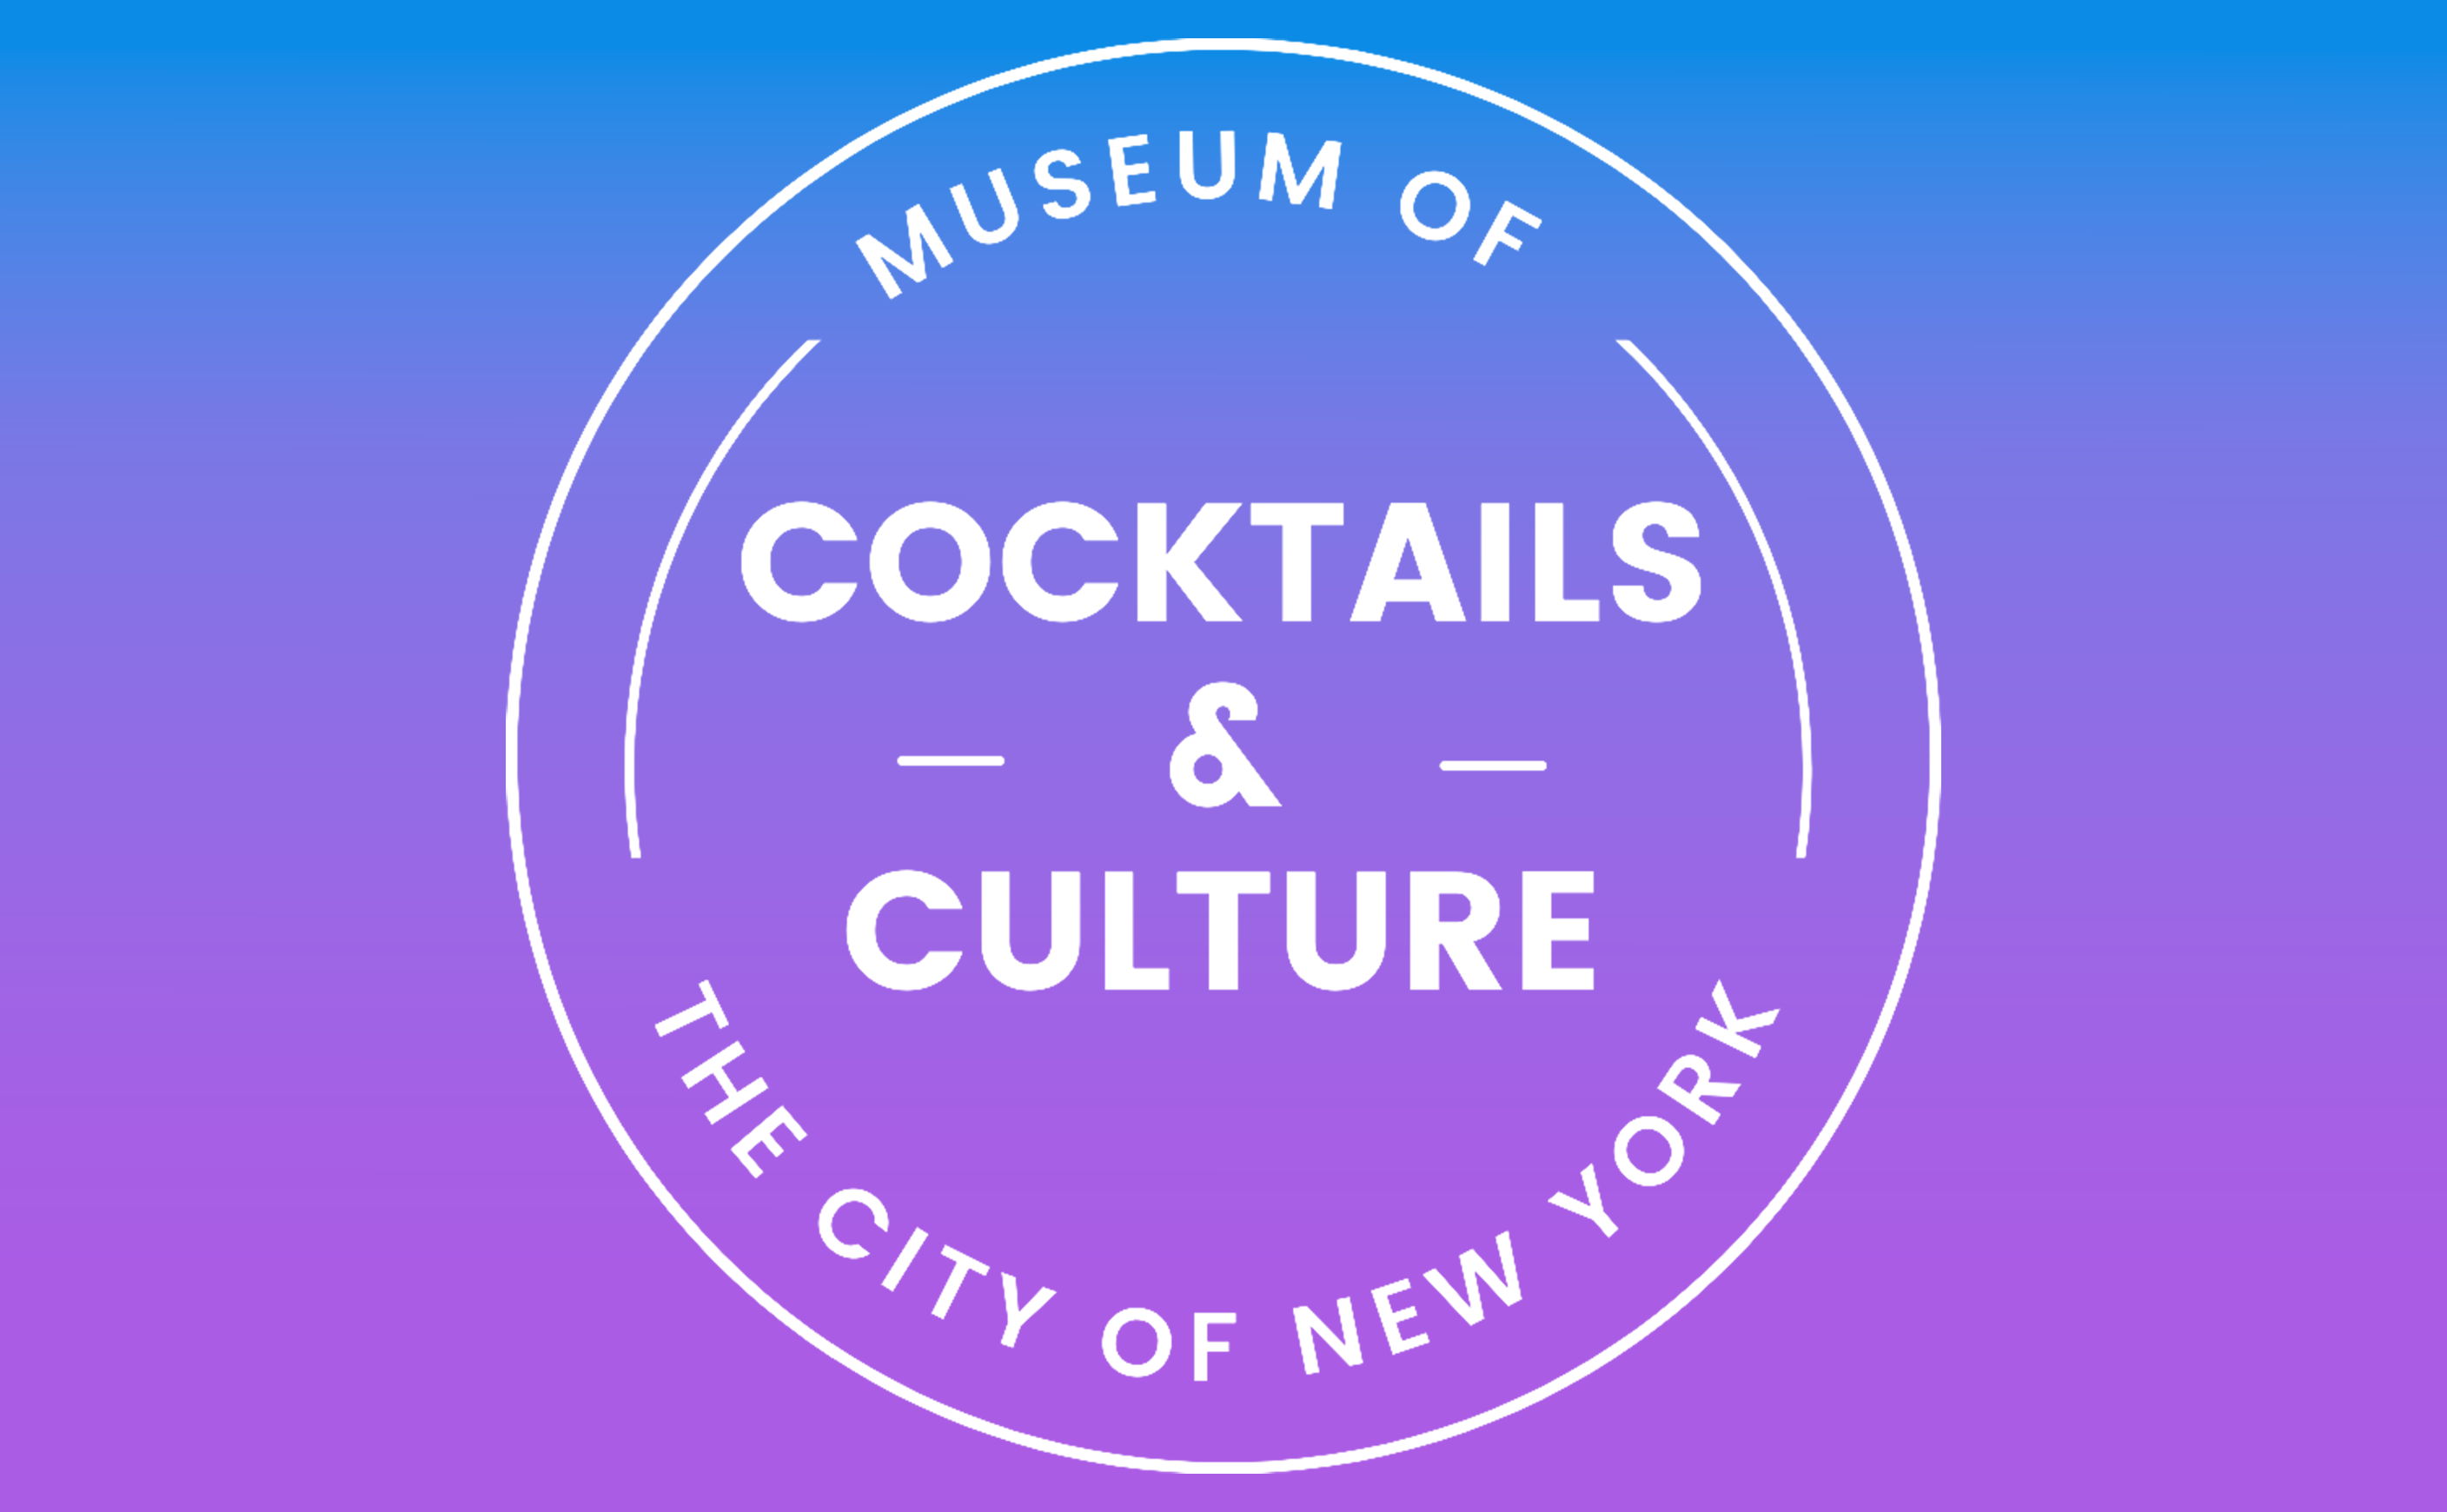 The words "Cocktails & Culture" in a white circle on a blue and purple background.